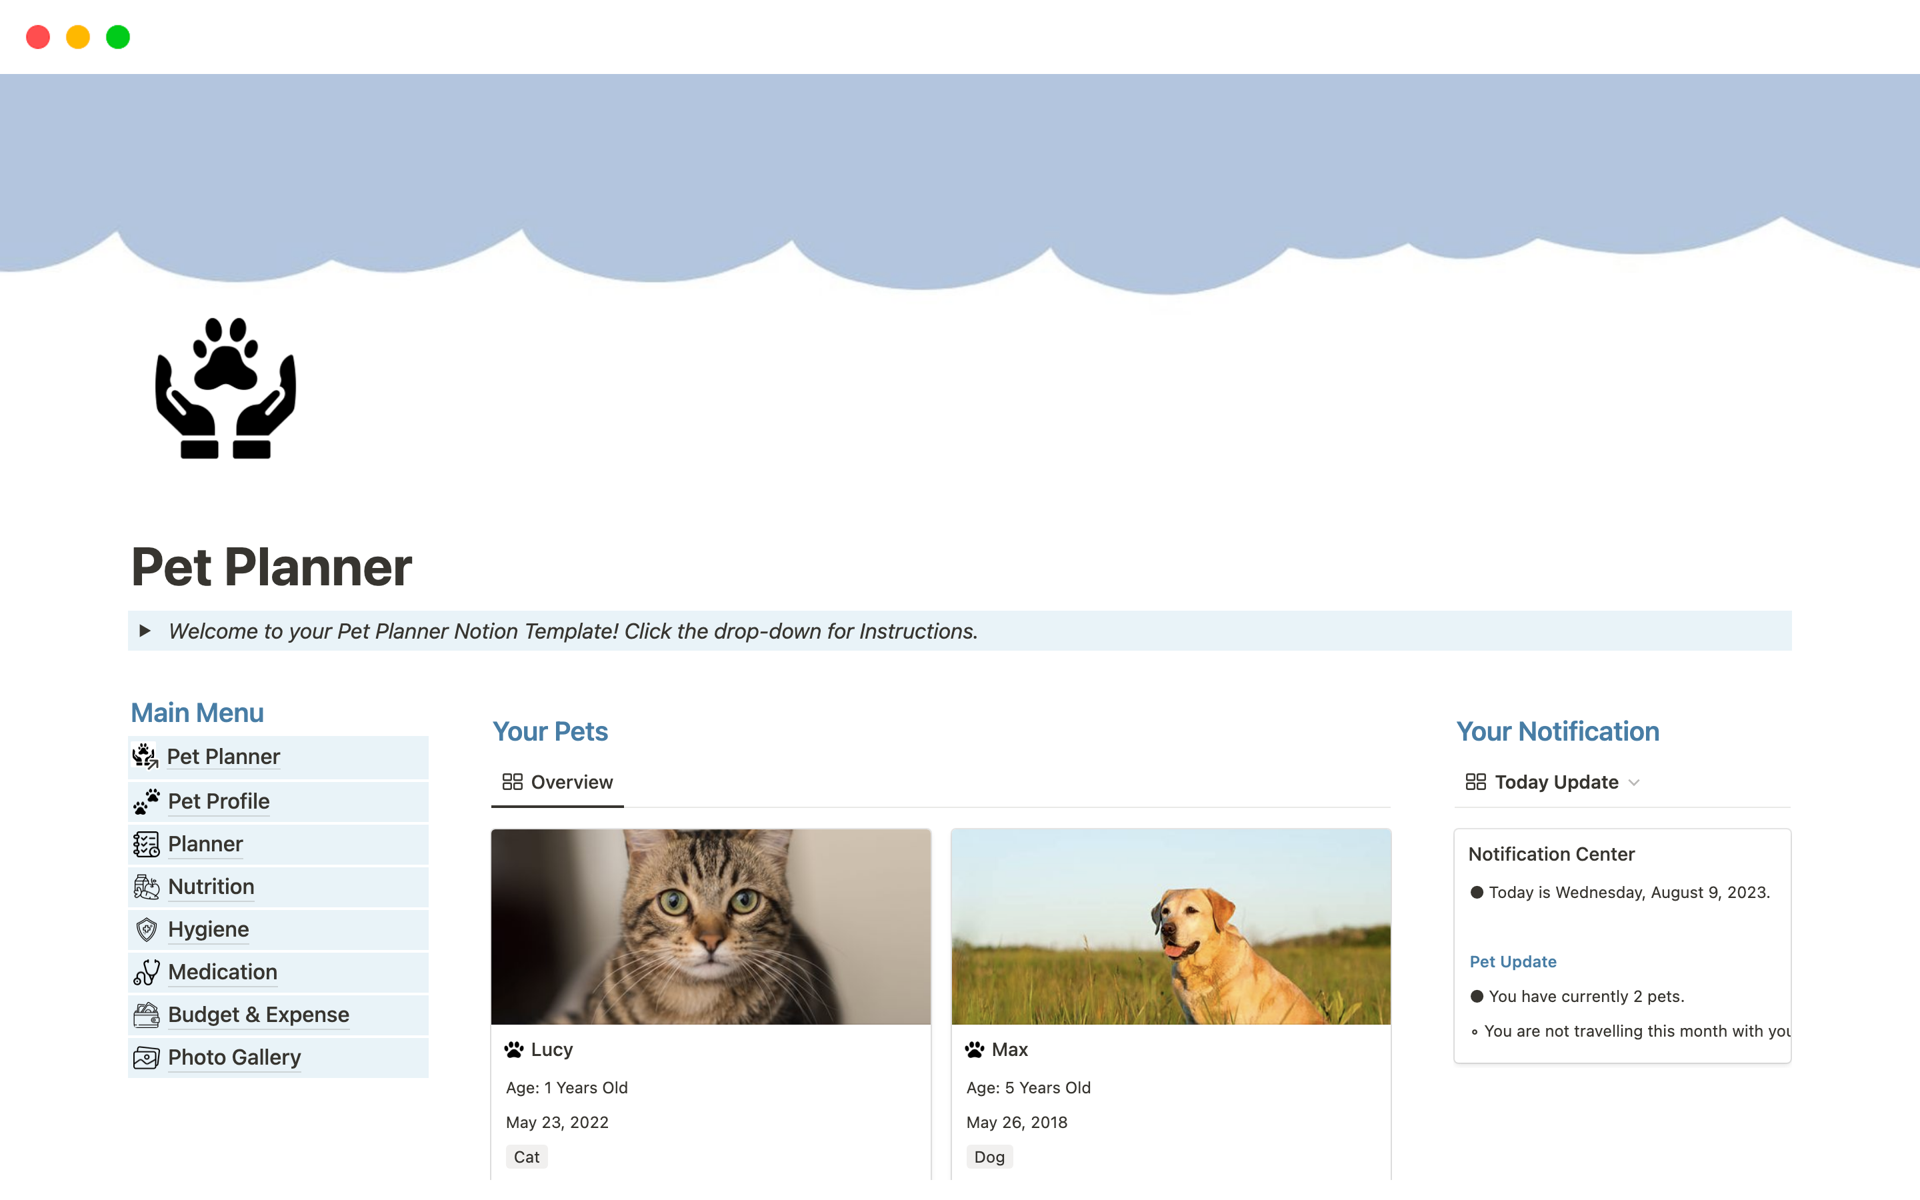 Get your pet's well-being on track and stay organized with a thoughtfully designed Notion Template.

